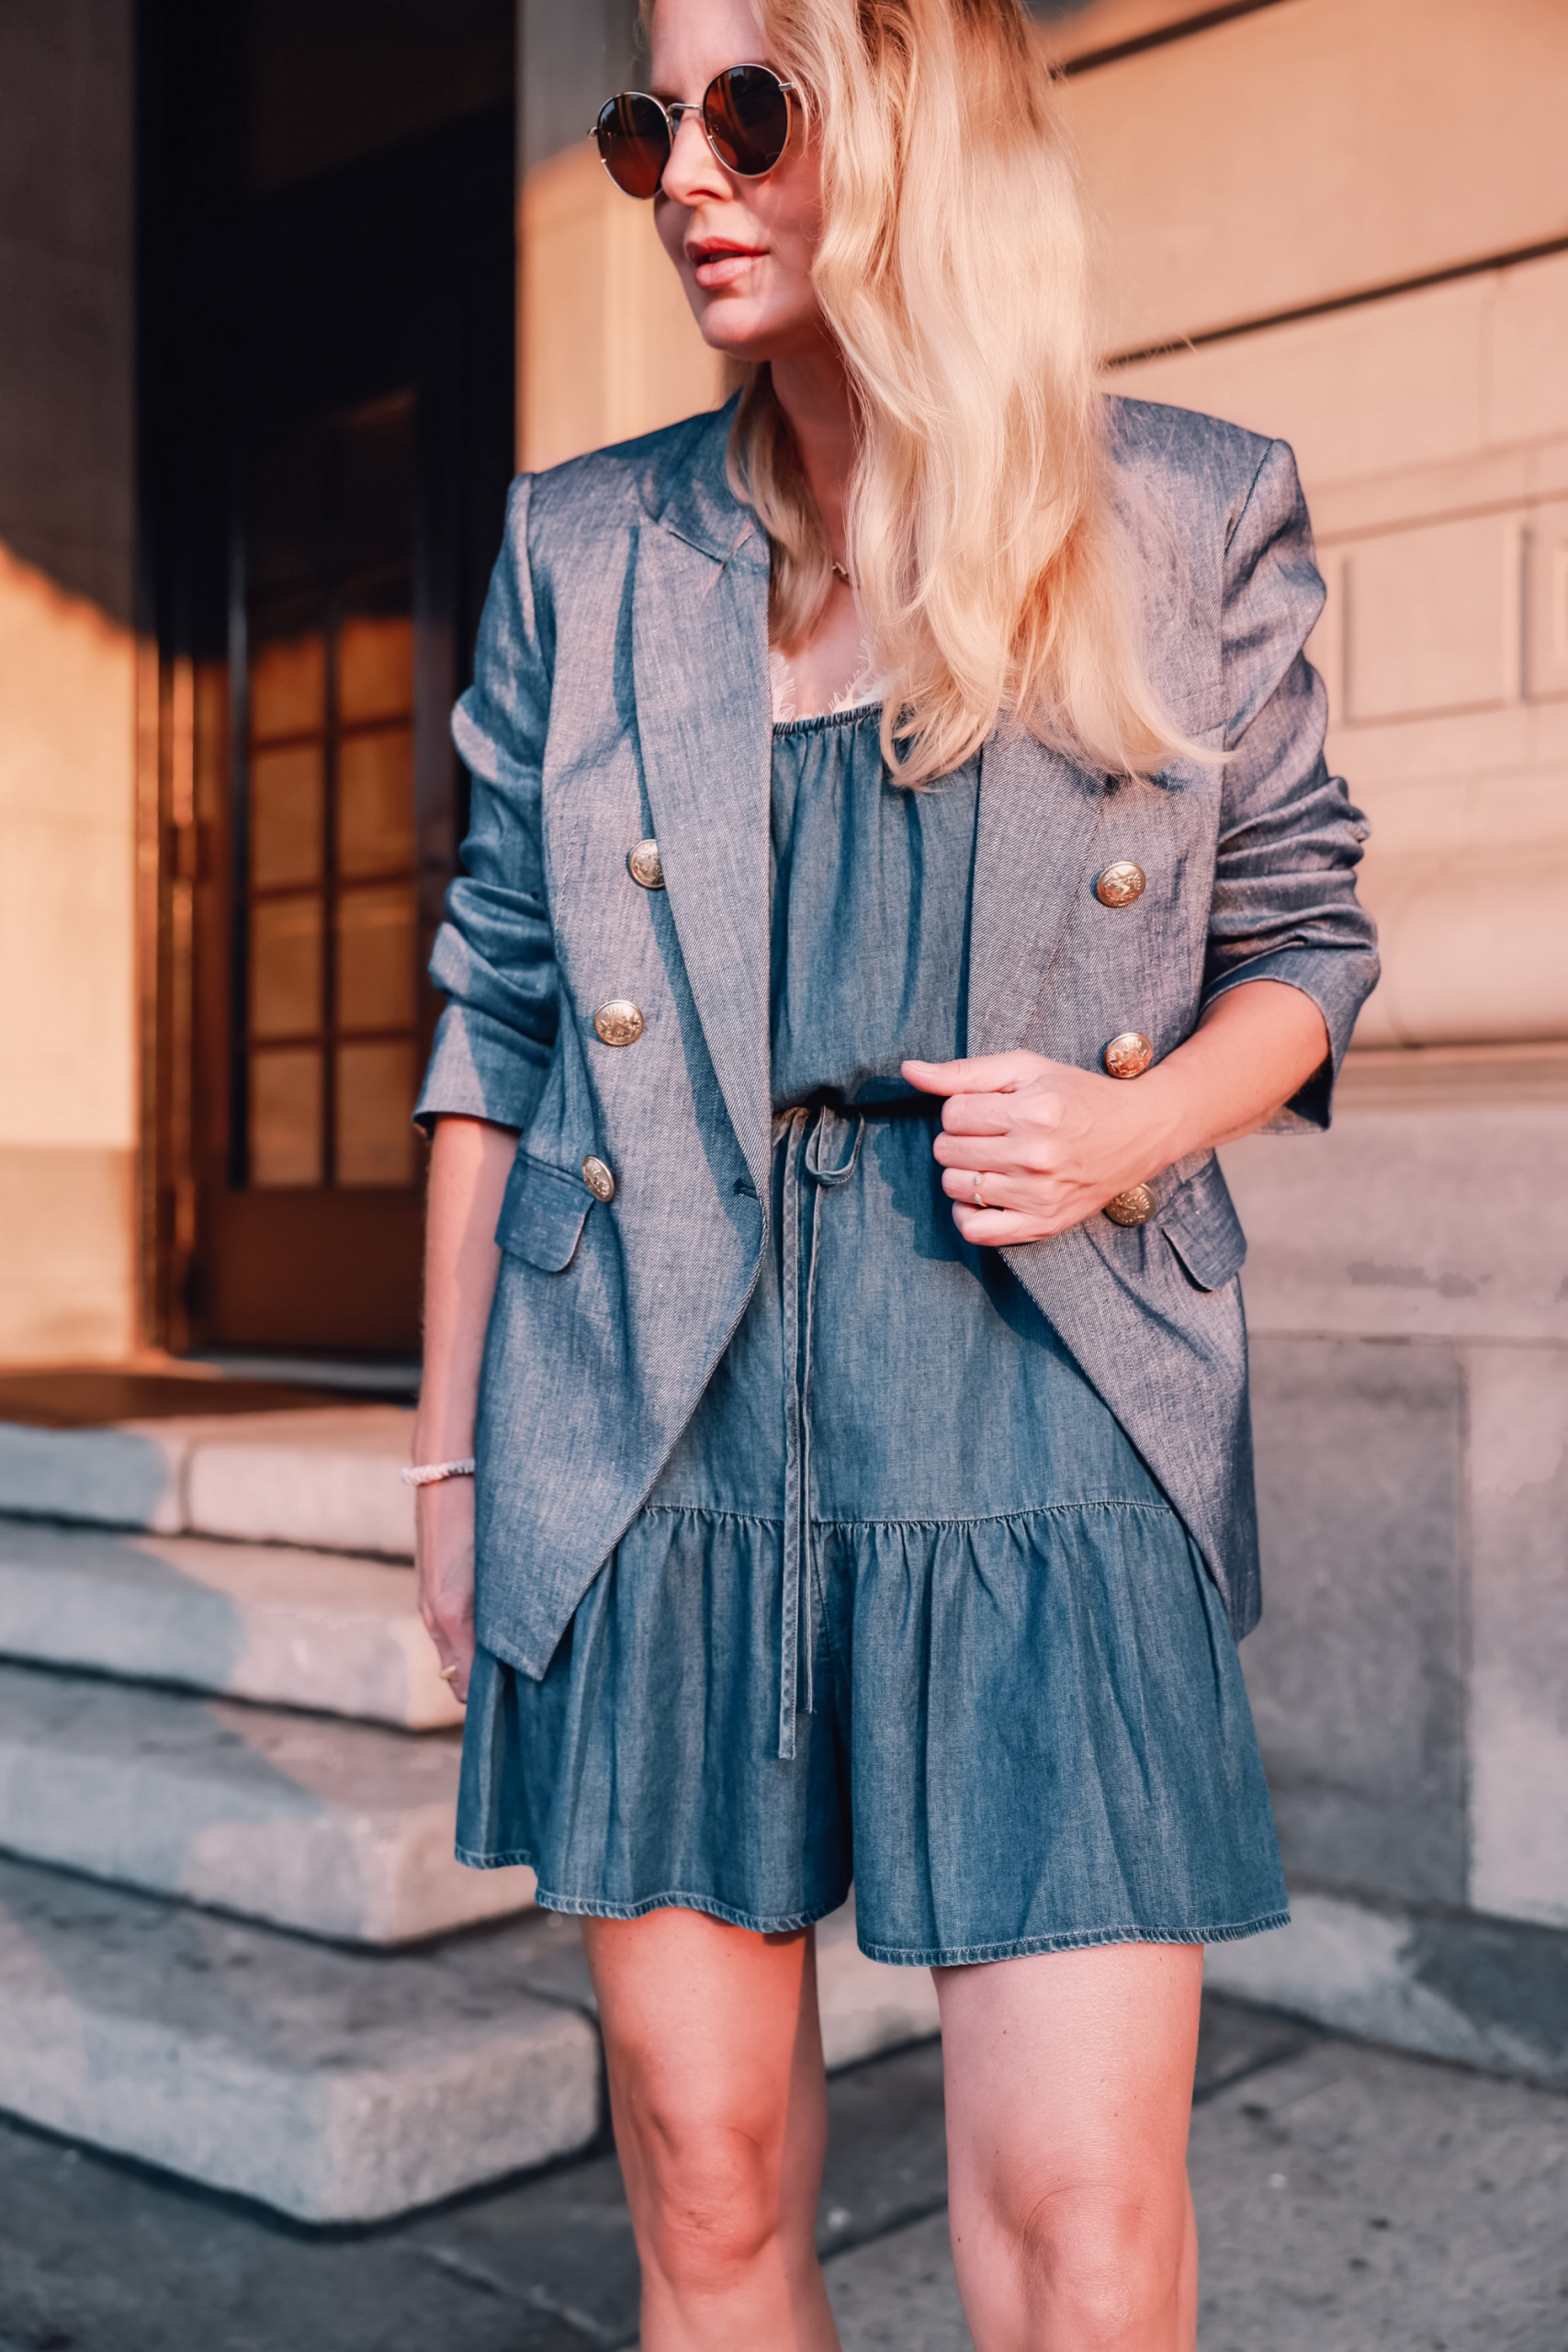 How to Wear a Romper for Summer - the gray details